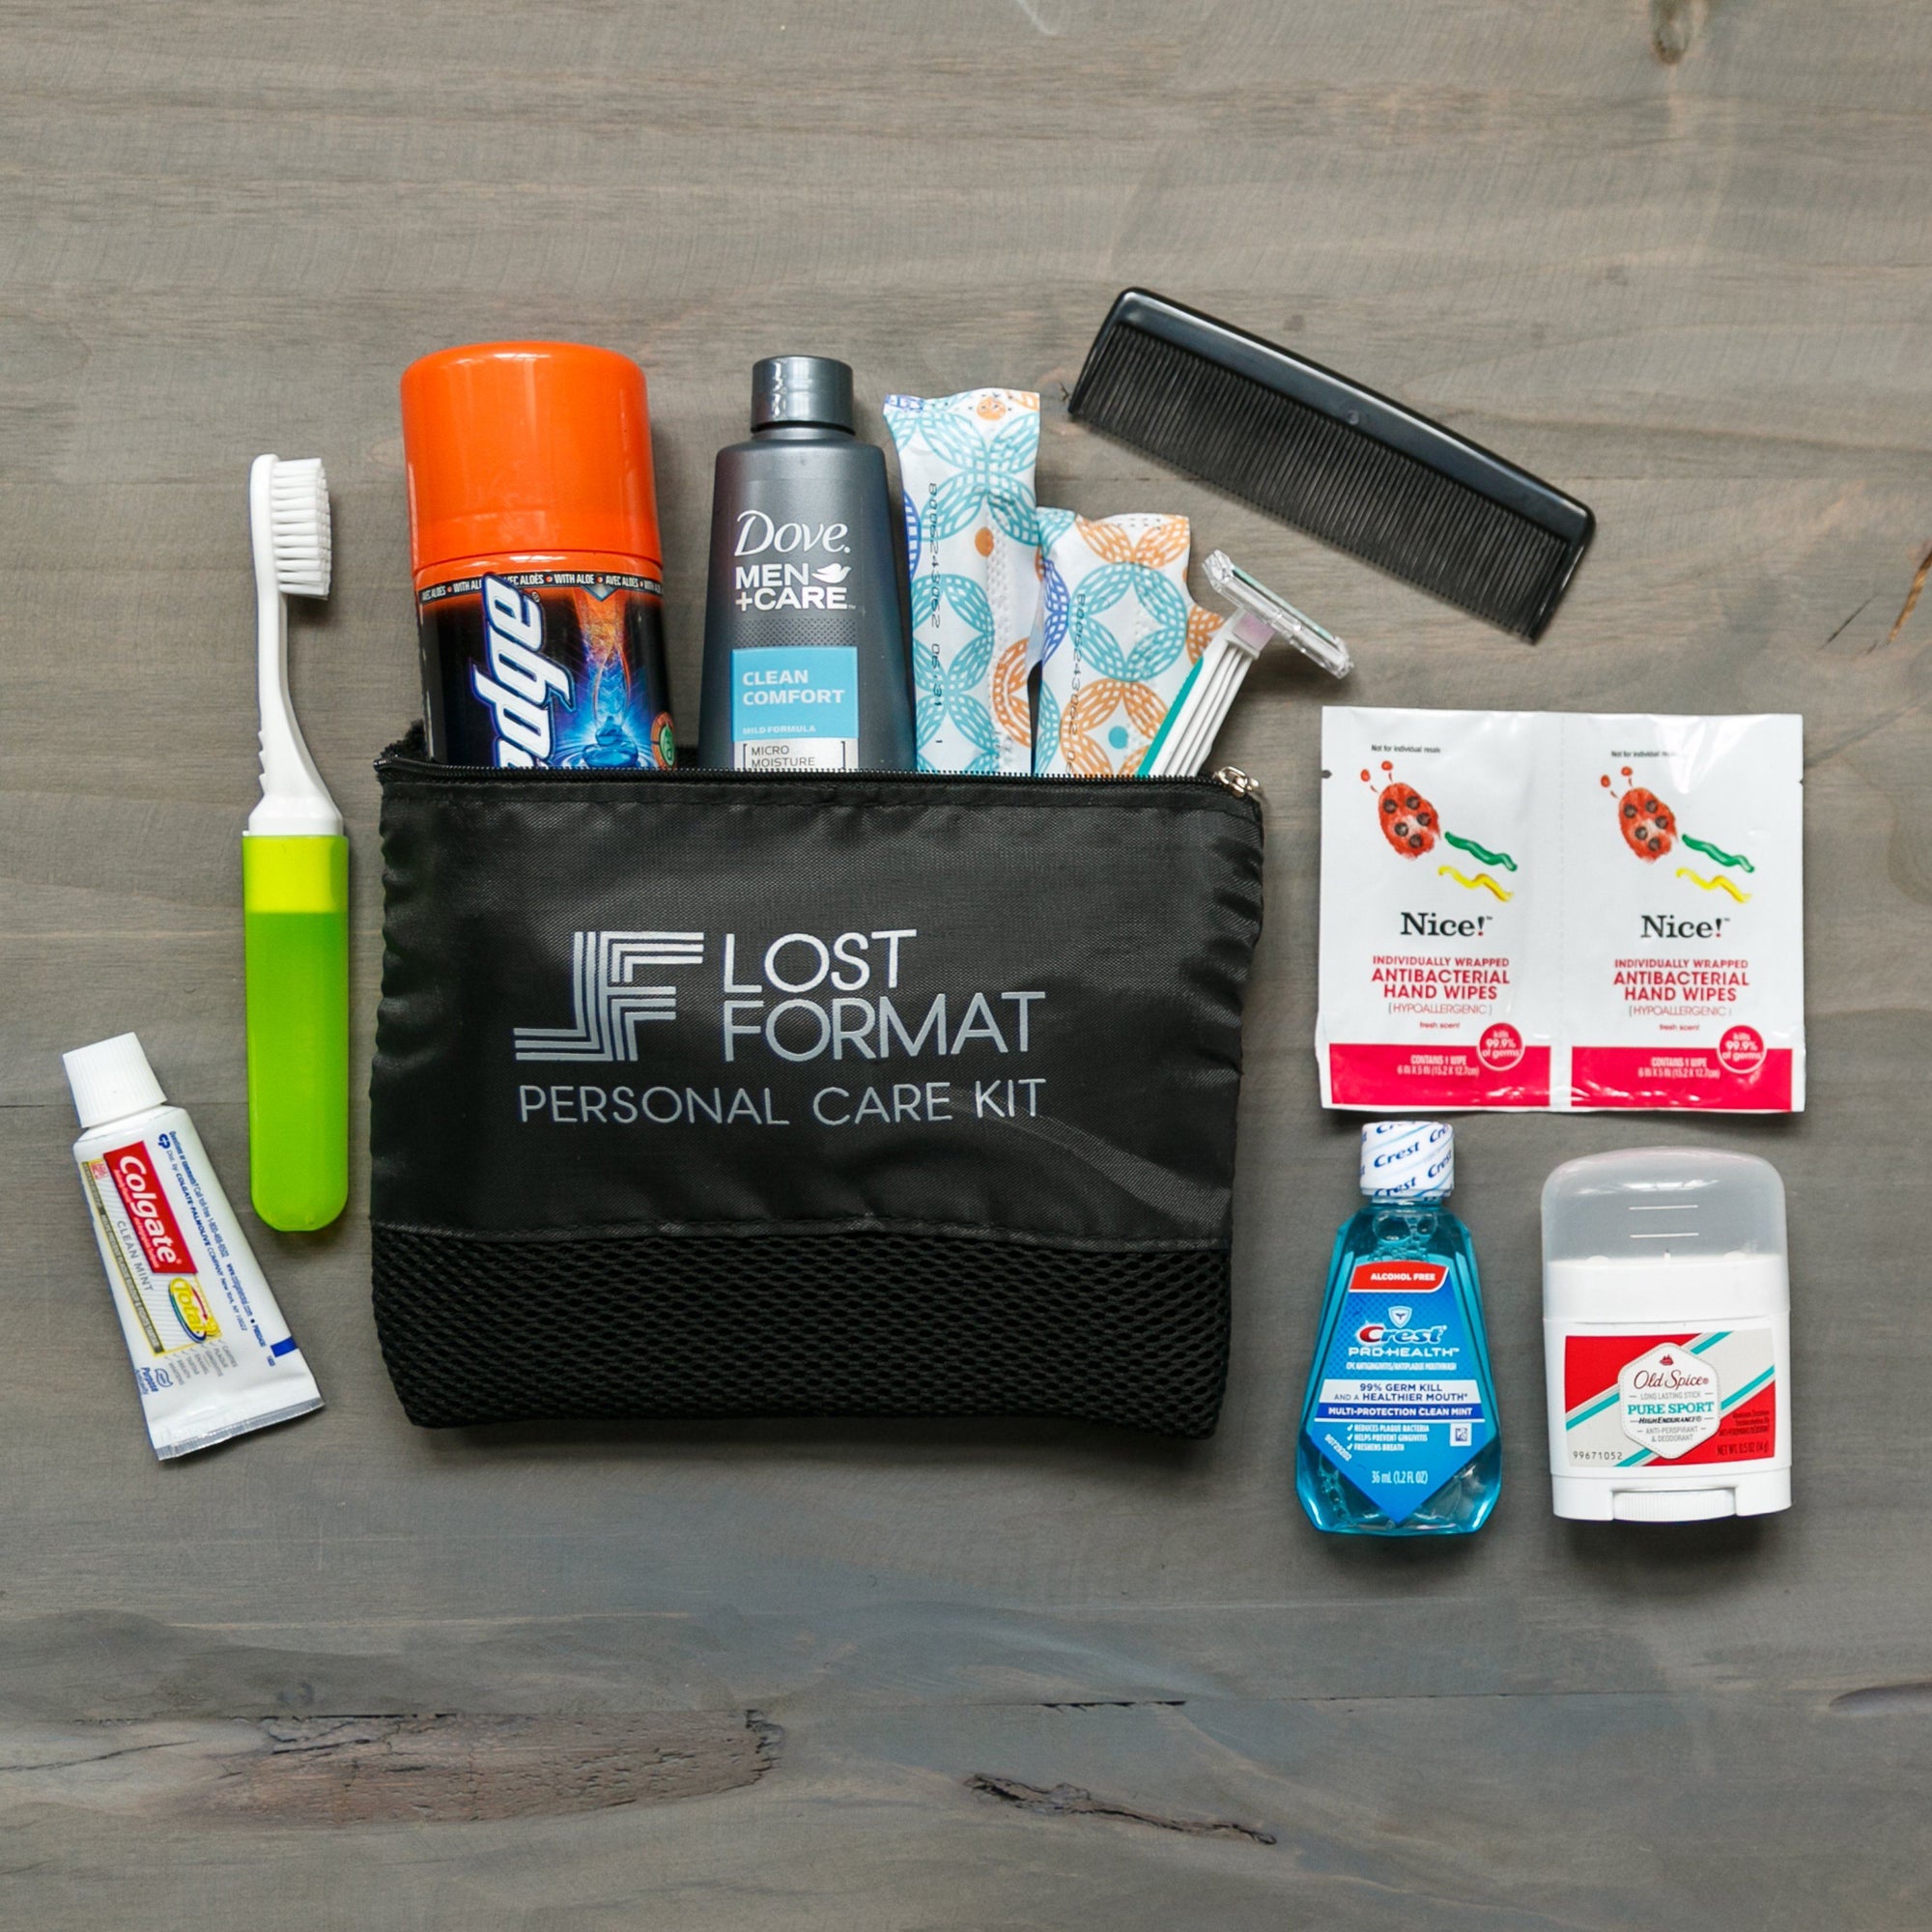 Free personal care product giveaway